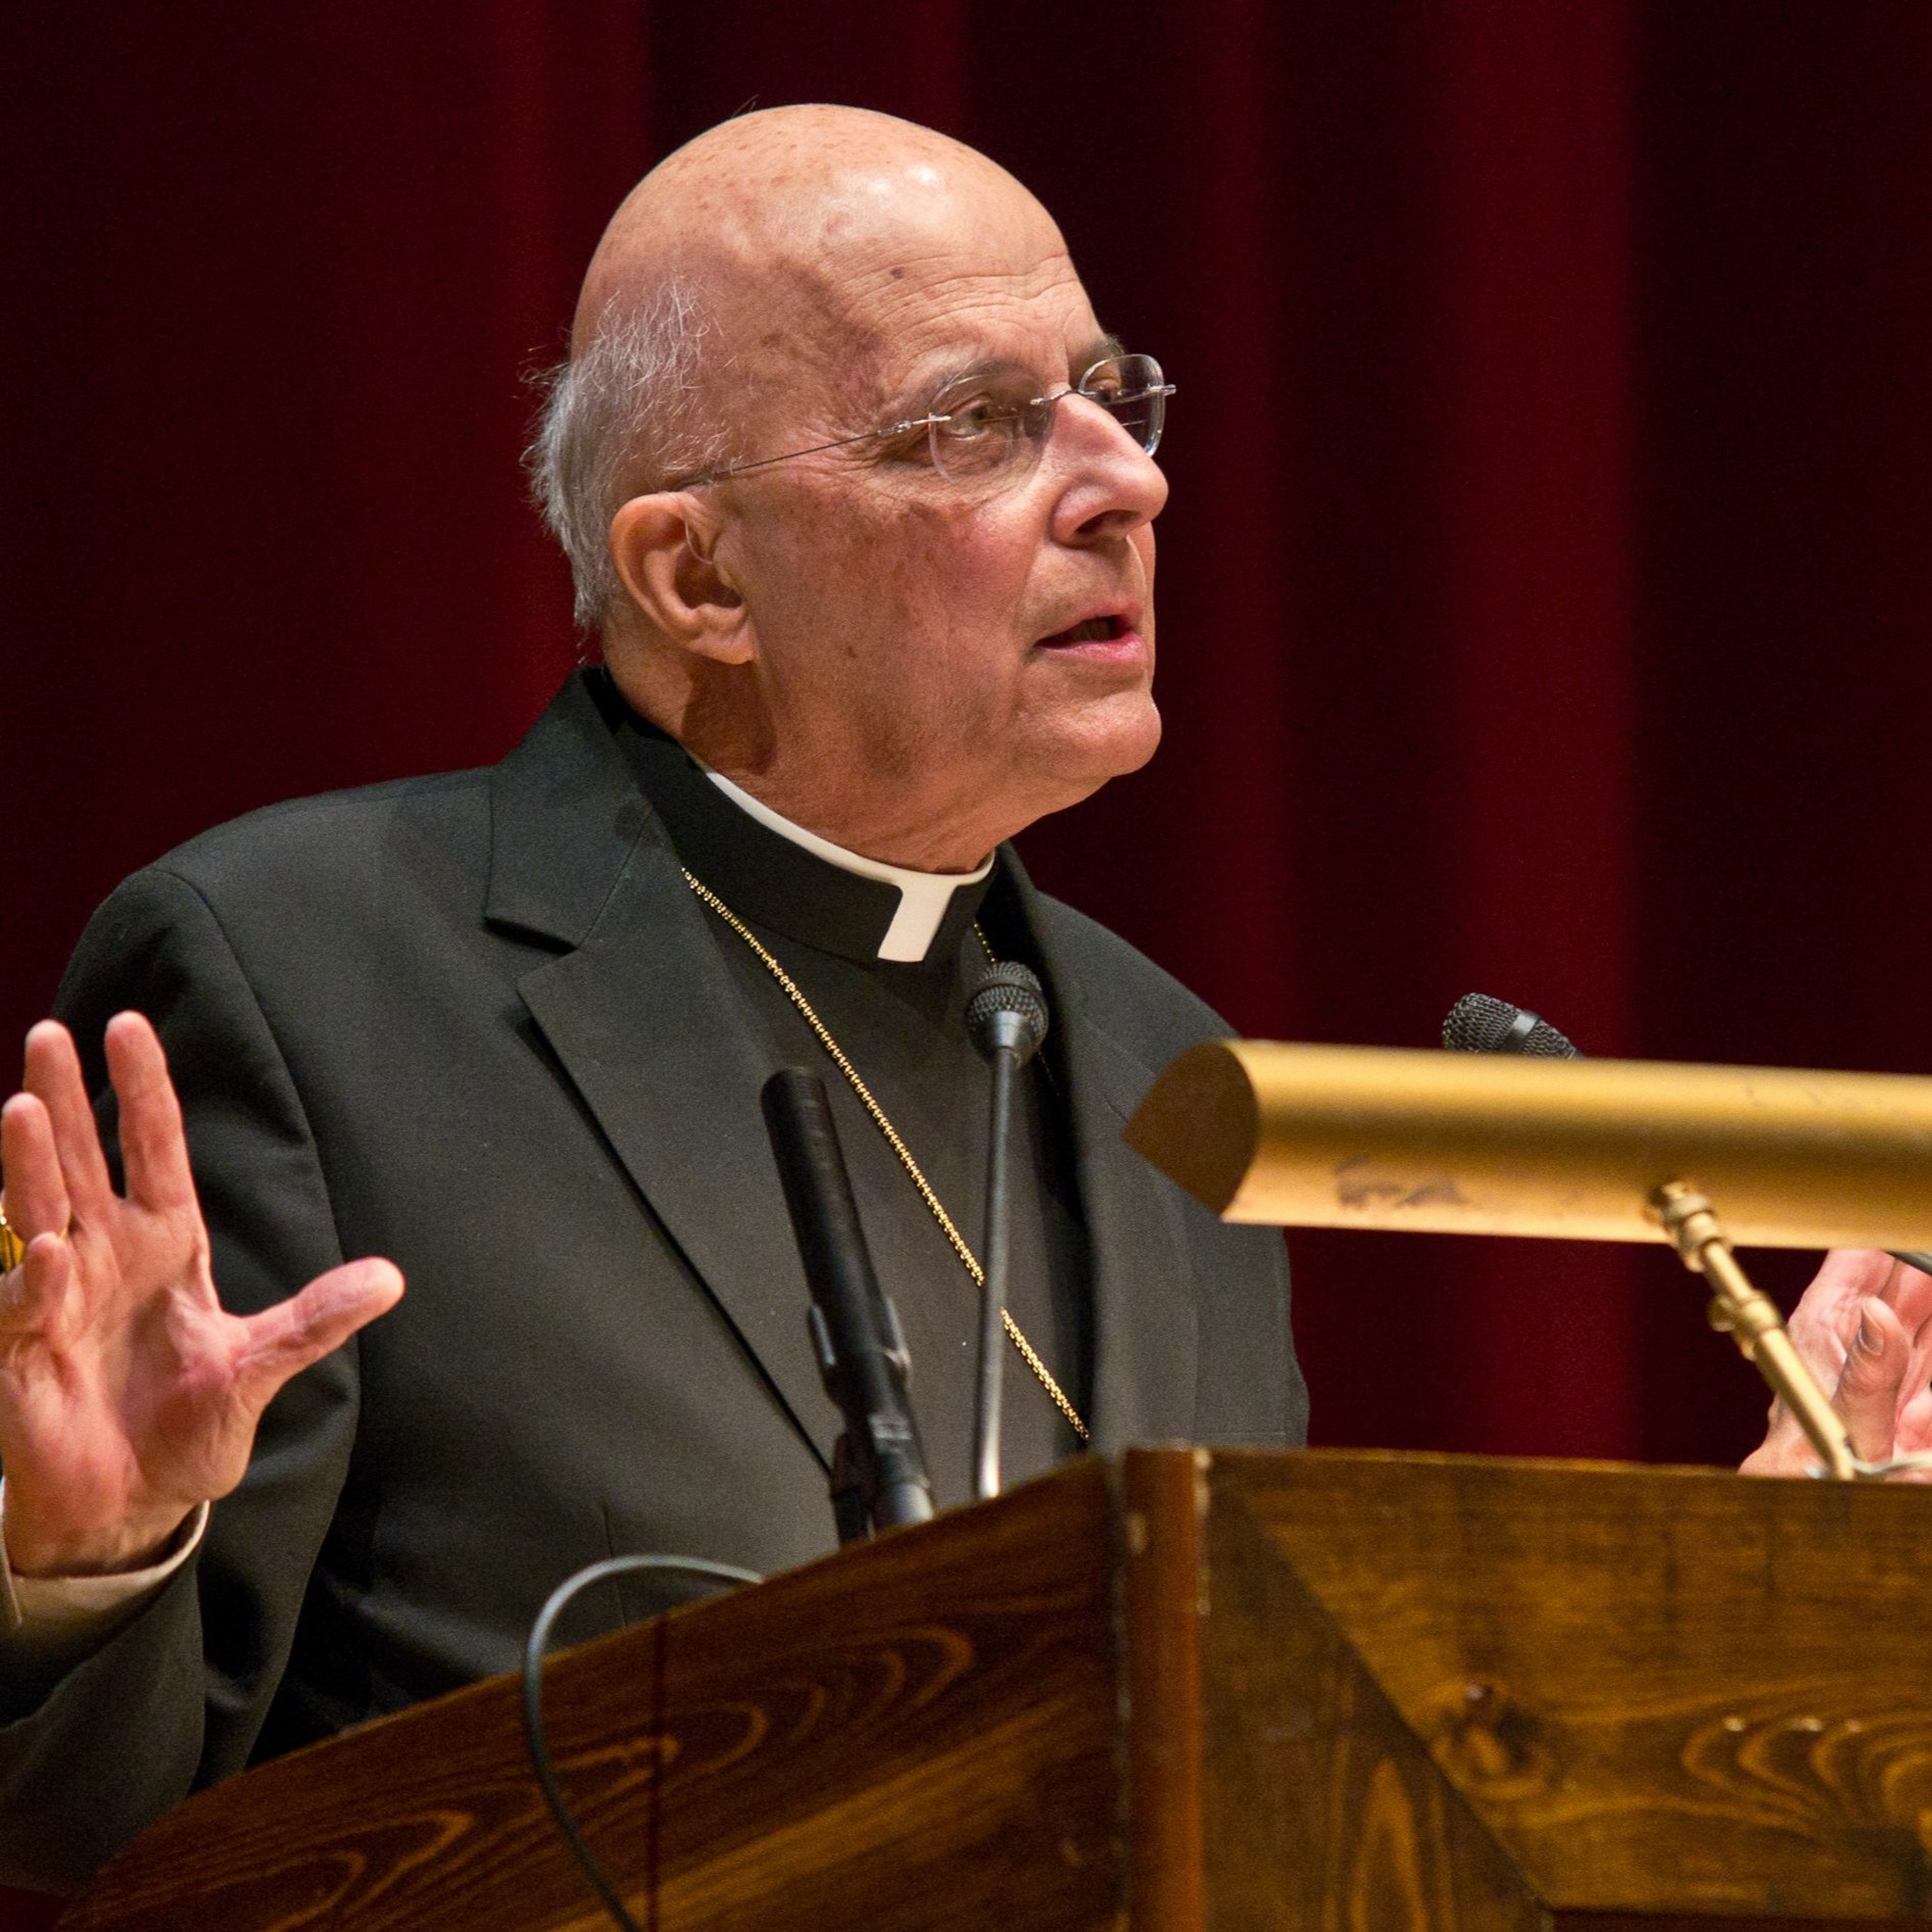 Cardinal Francis George, the American Contribution to Catholic Social Thought, & Our Current Moment